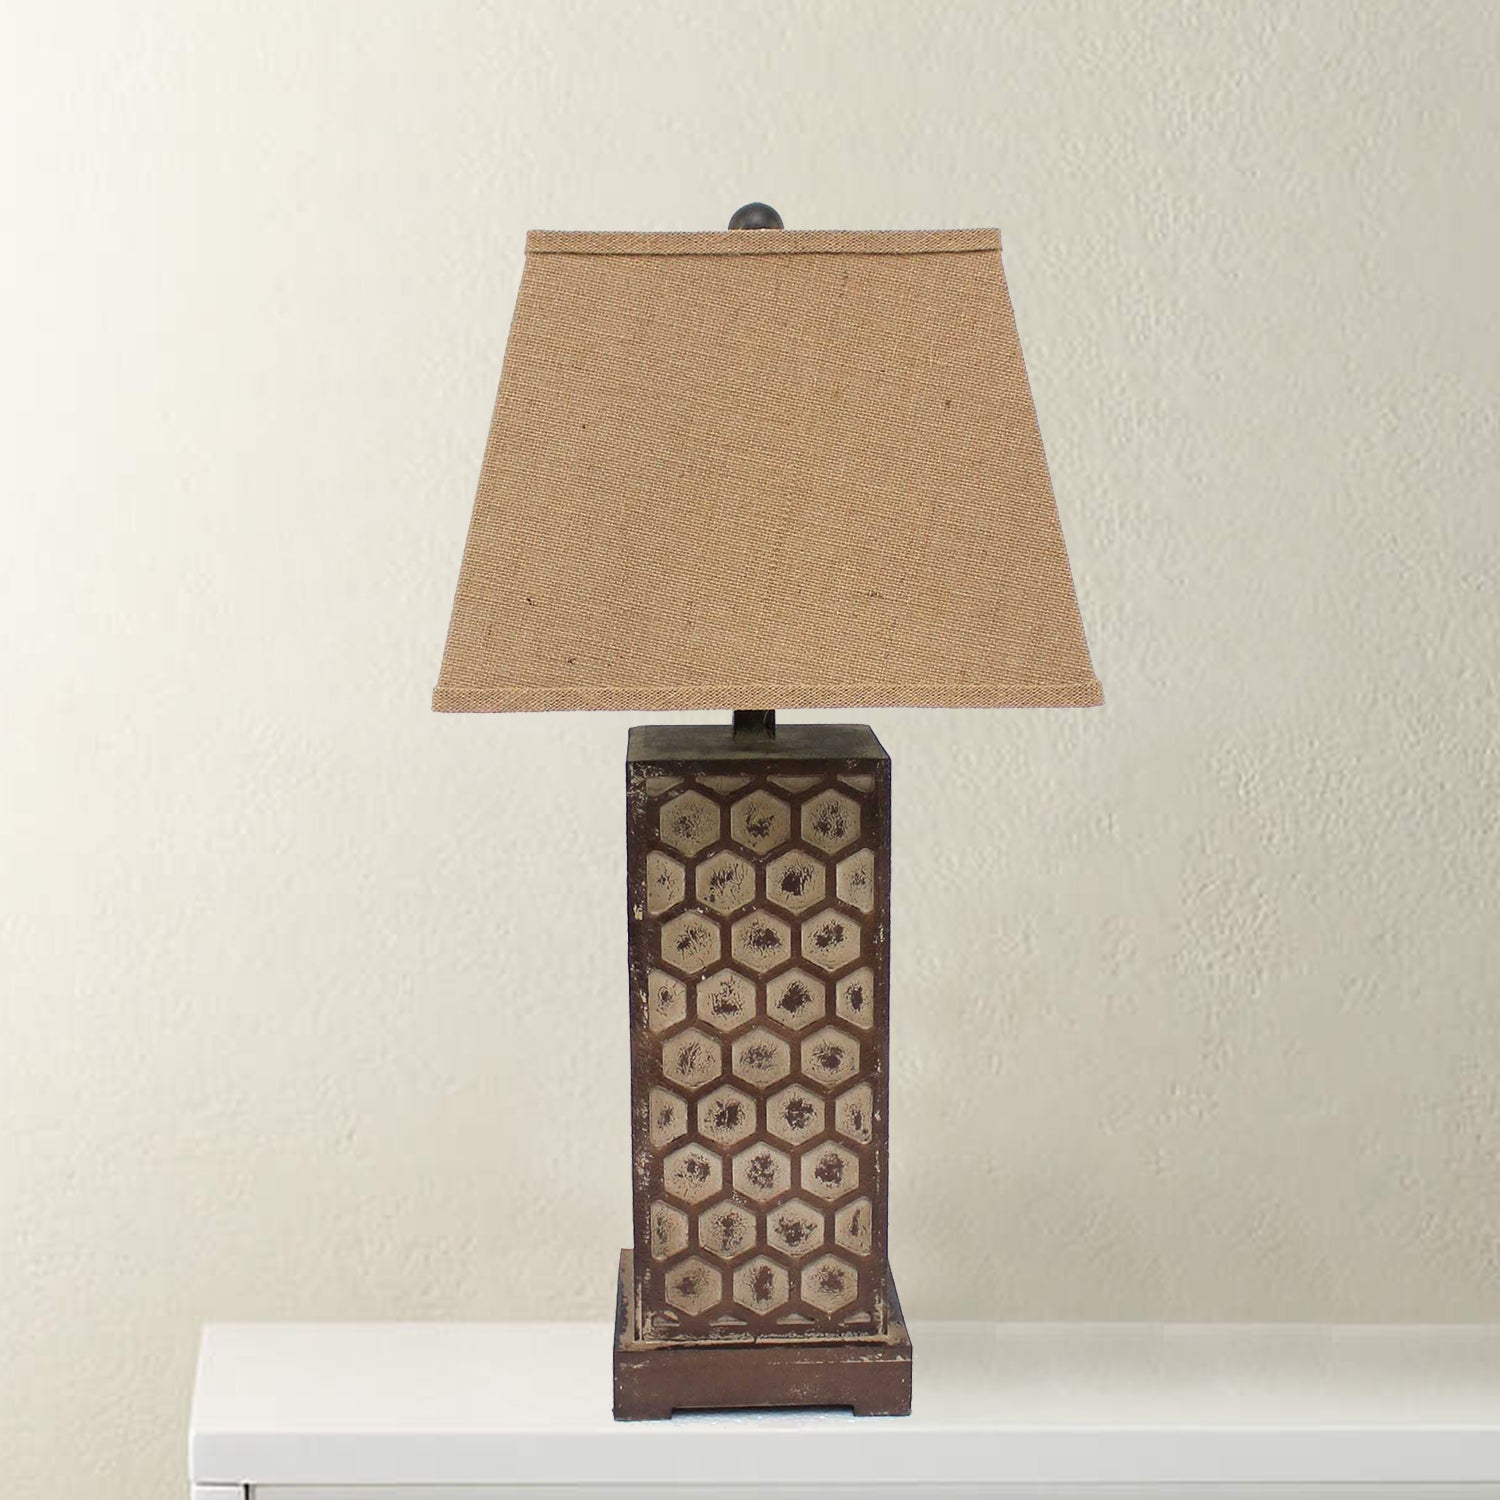 29" Brown Solid Wood Bedside Table Lamp With Brown Shade